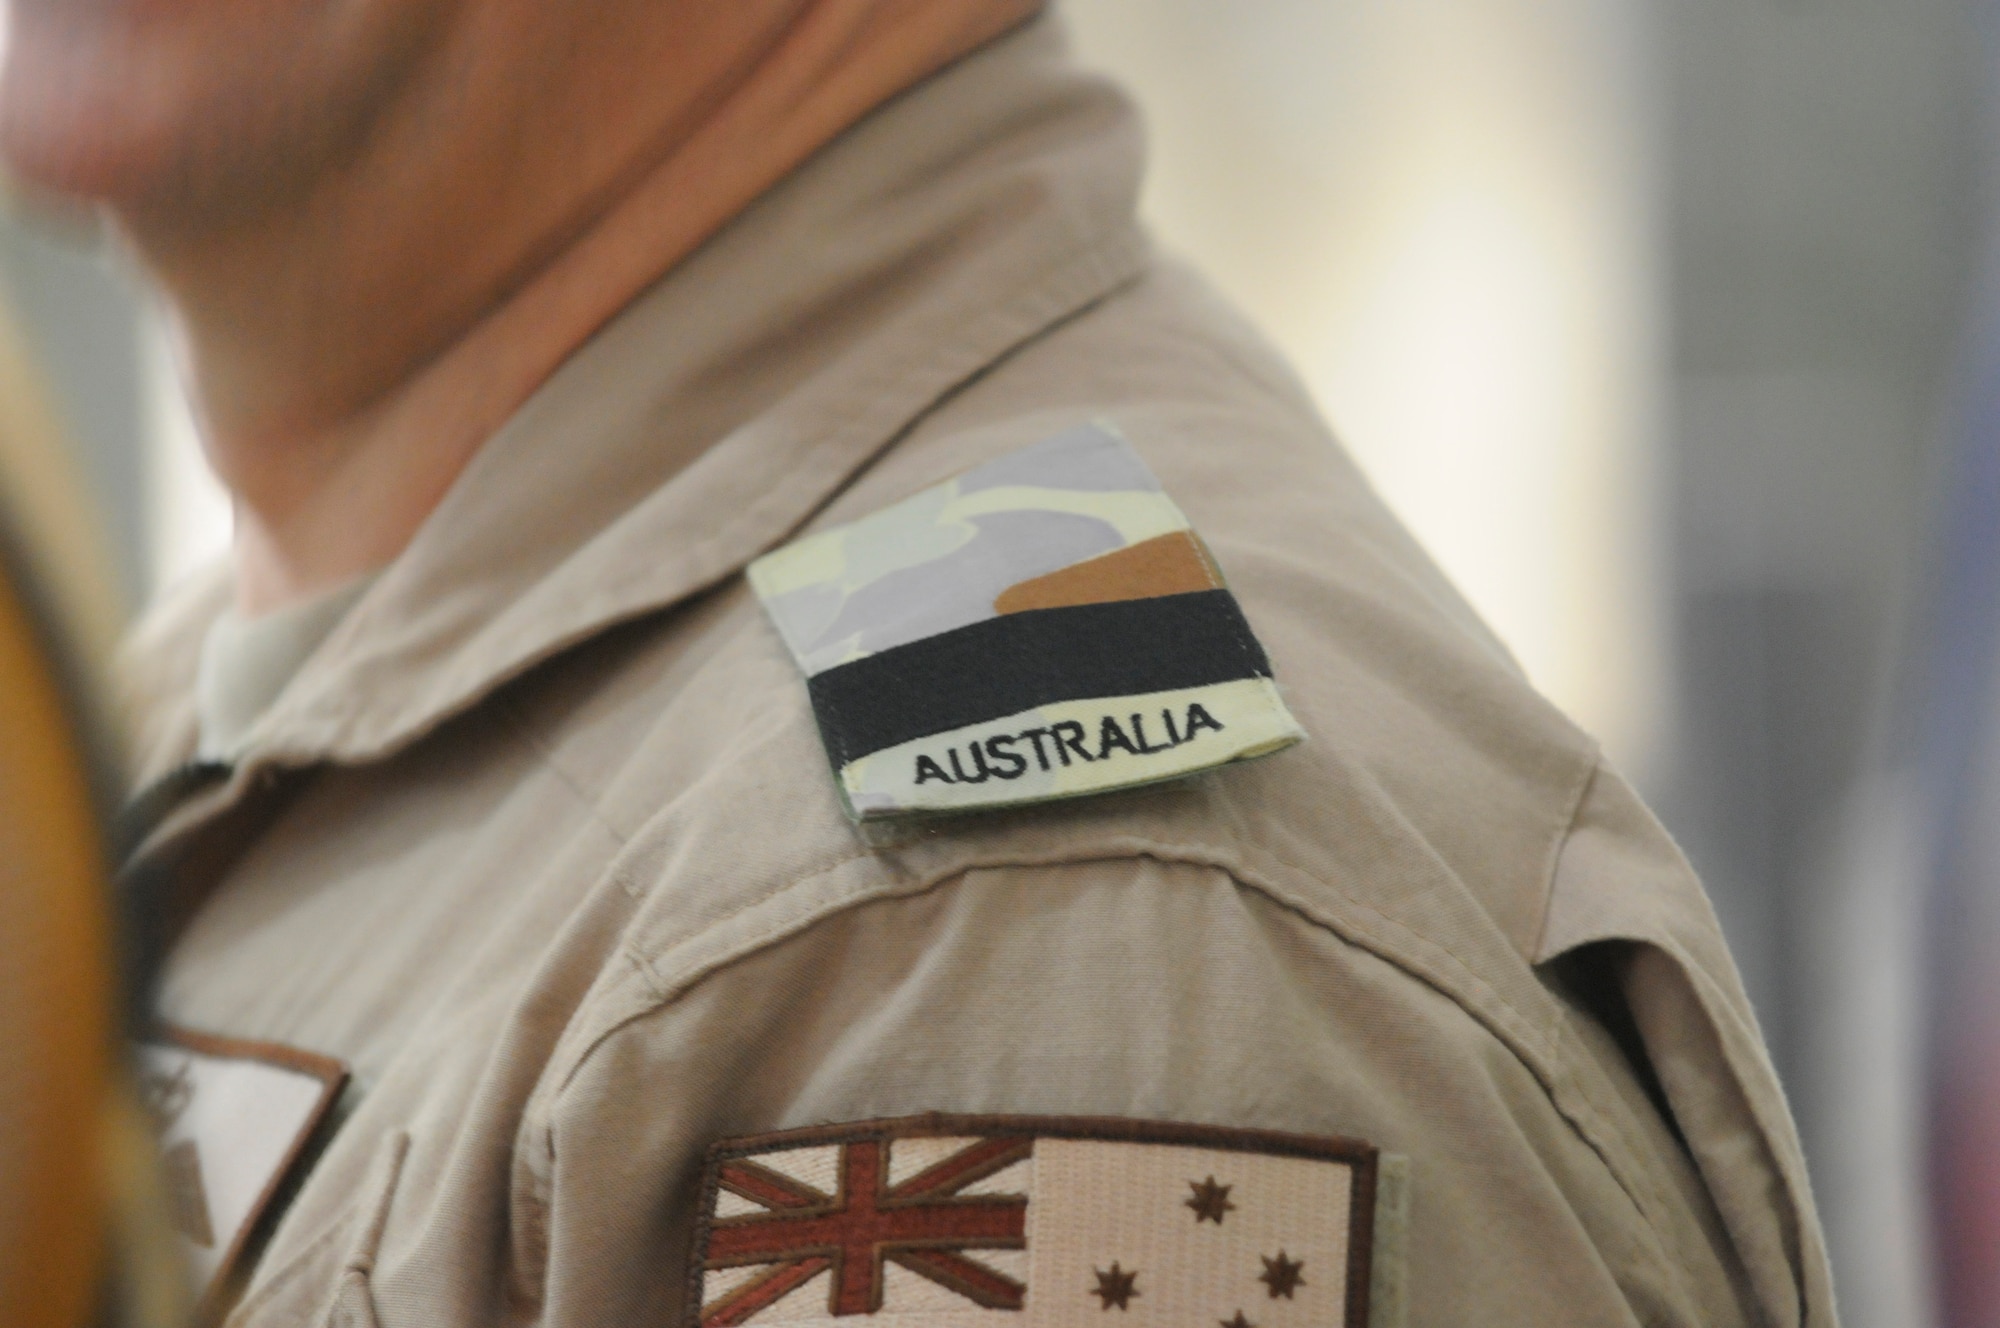 The Austrailian military contingent celebrated Australia Day at a non-disclosed Southwest Asia location, Jan. 26, 2010. The celebration included a barbecue, conversation, mingling with Coalition forces and watching a broadcast of an Australian team competing in a cricket match. (U.S. Air Force photo by Senior Master Sgt. David Byron)[RELEASED]